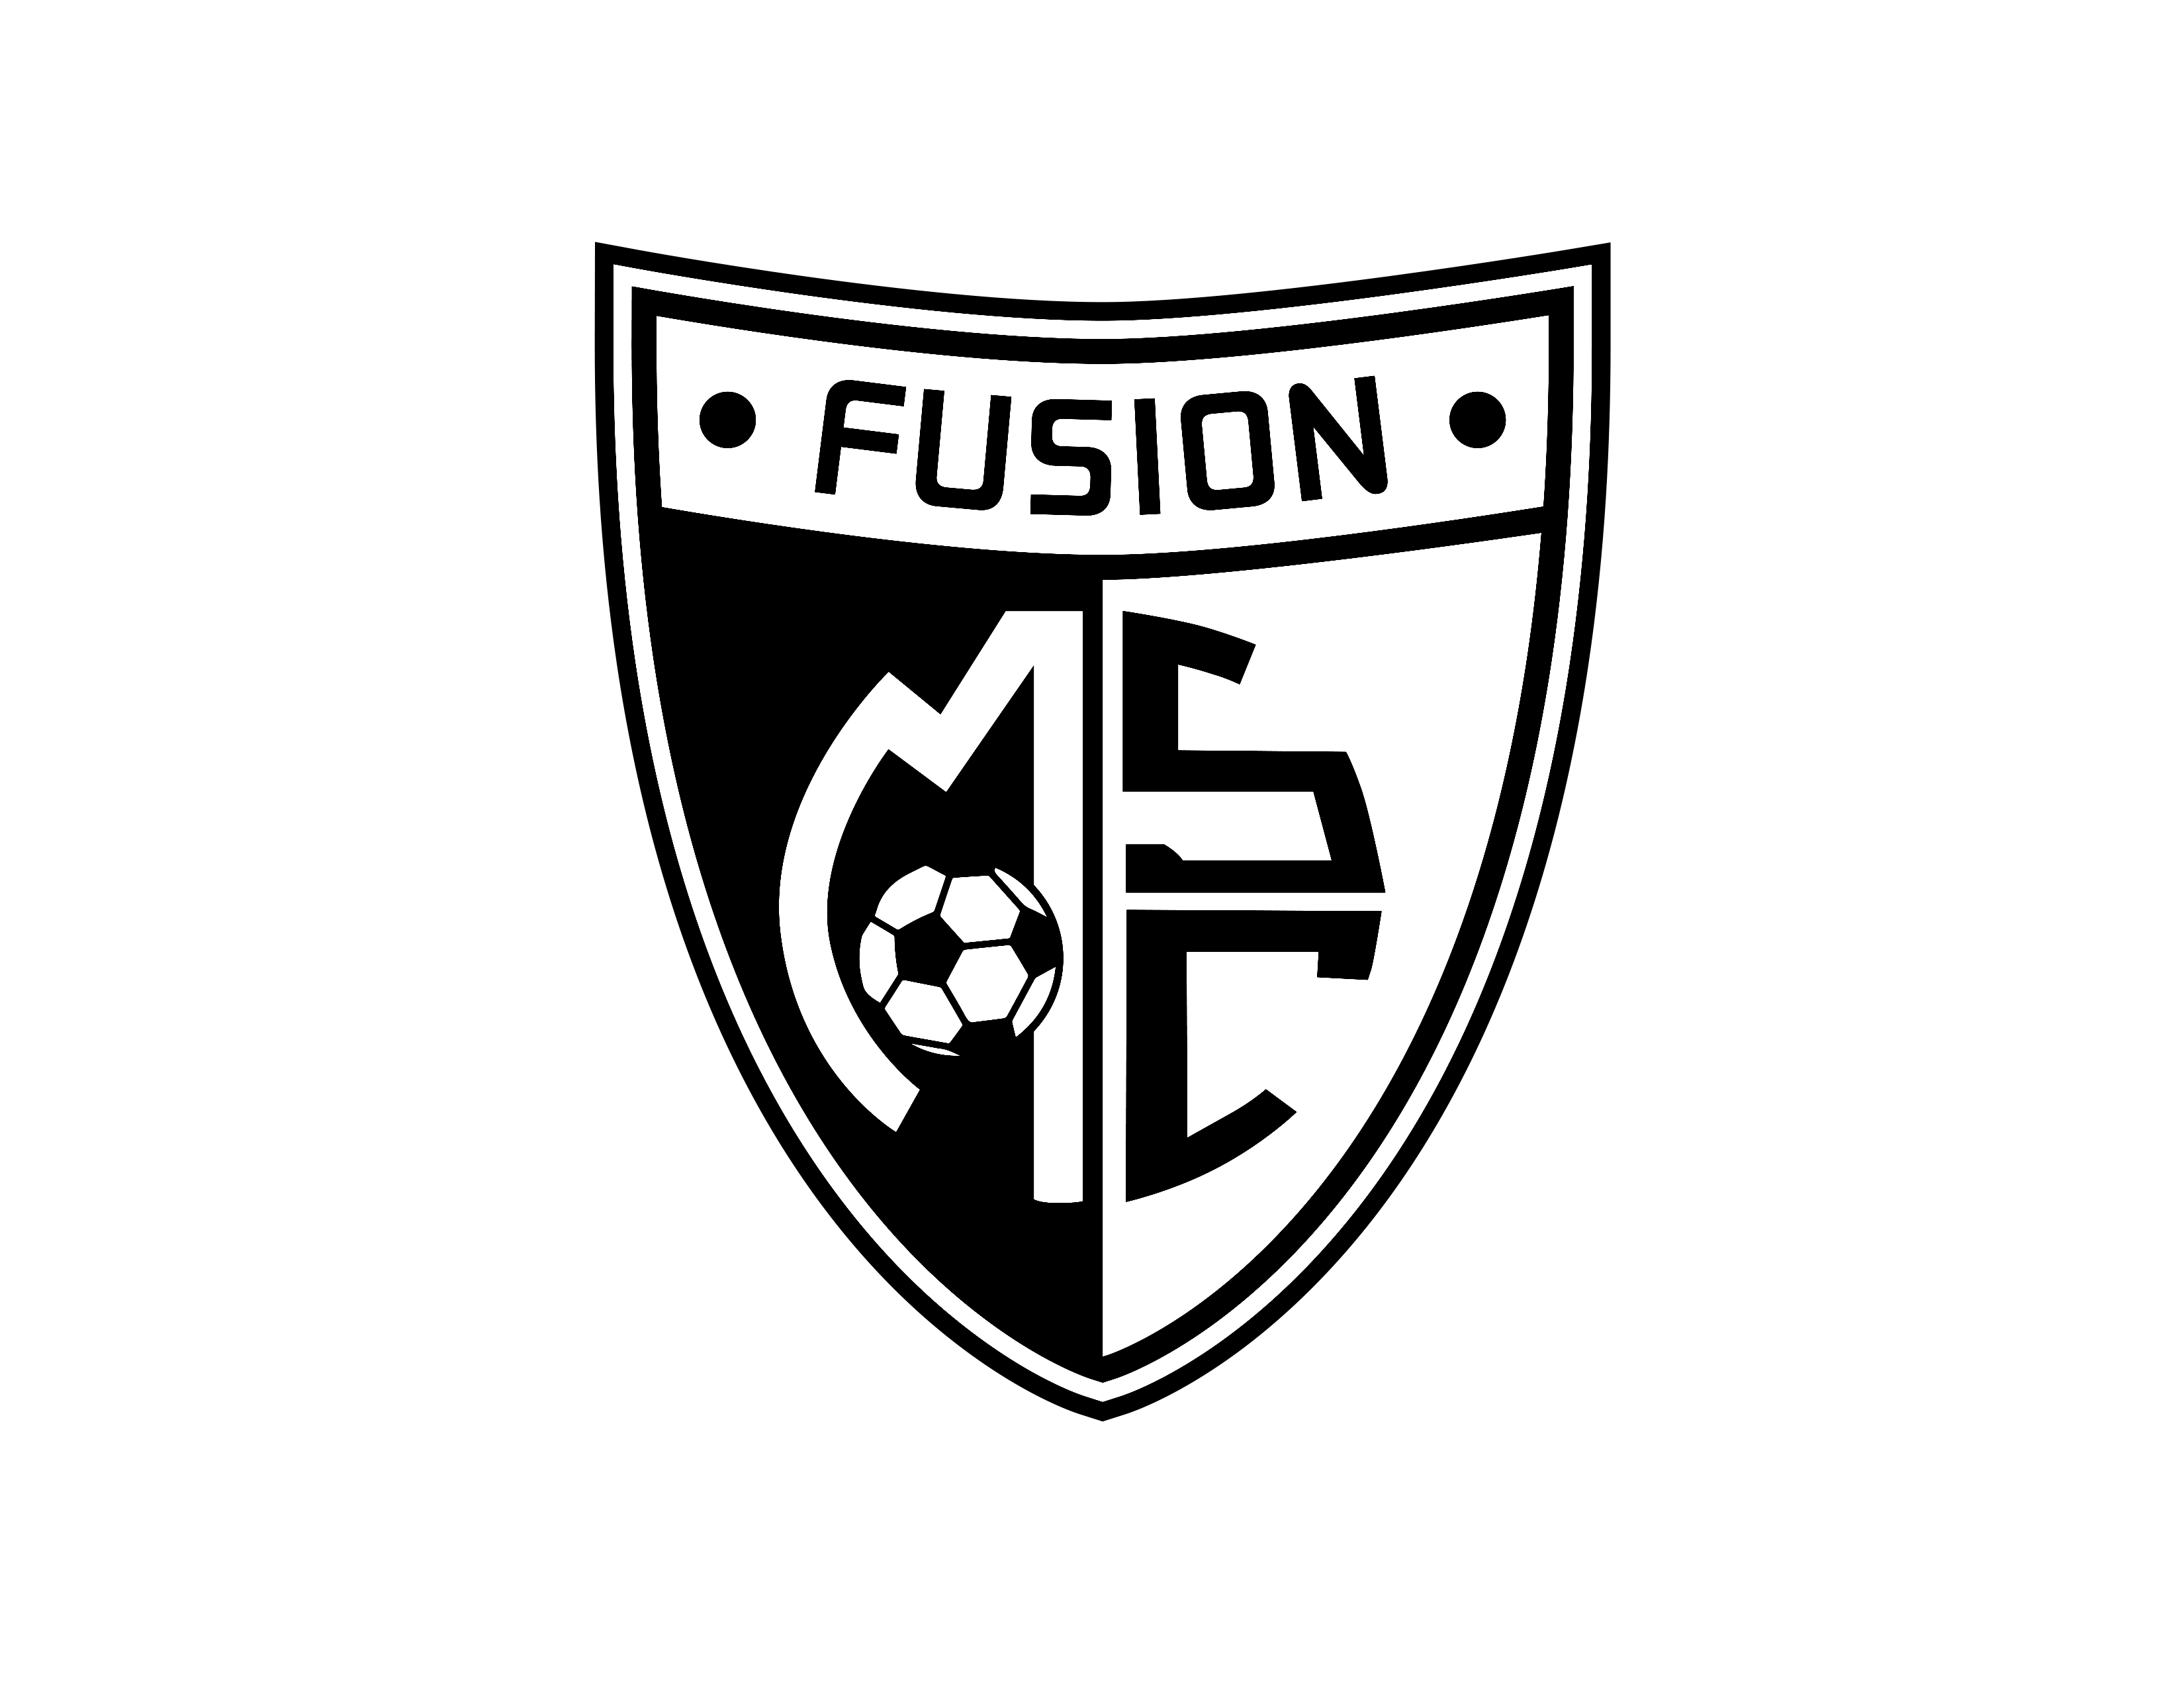 Fusion Tryout date set by the state- June 11-12, 2022